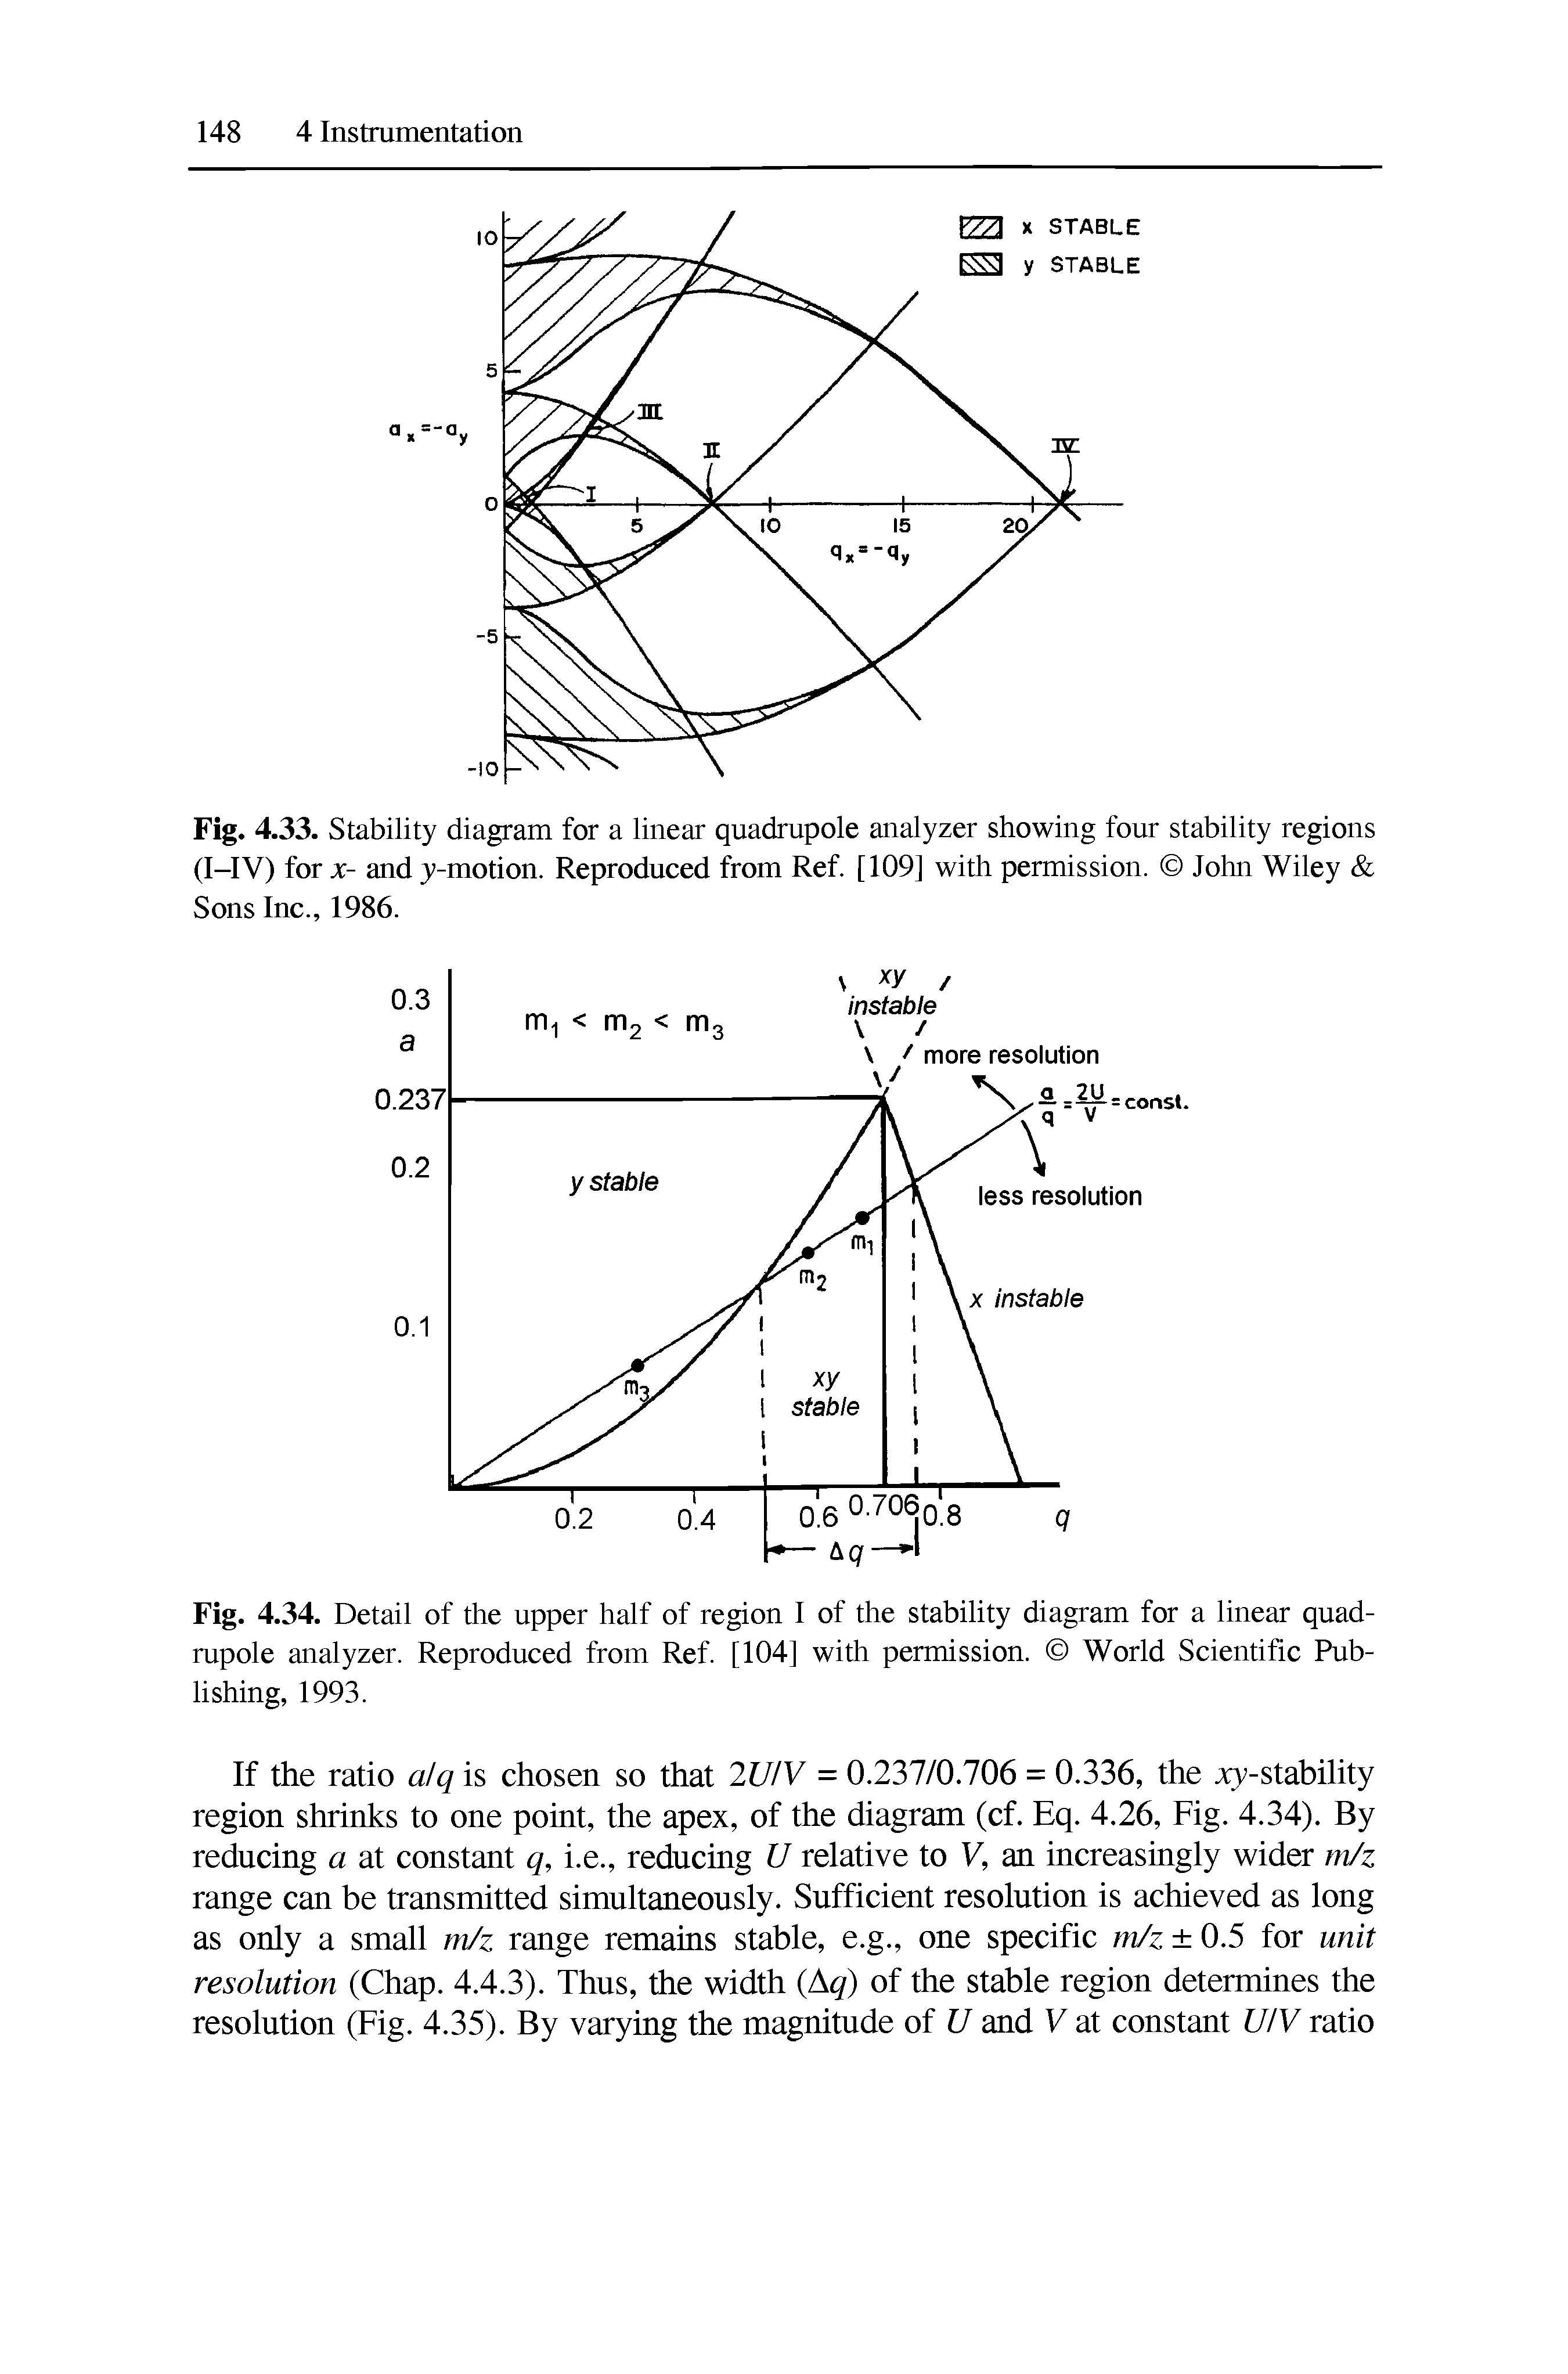 Fig. 4.33. Stability diagram for a linear quadrupole analyzer showing four stability regions (I-IV) for X- and y-motion. Reproduced from Ref. [109] with permission. John Wiley Sons Inc., 1986.